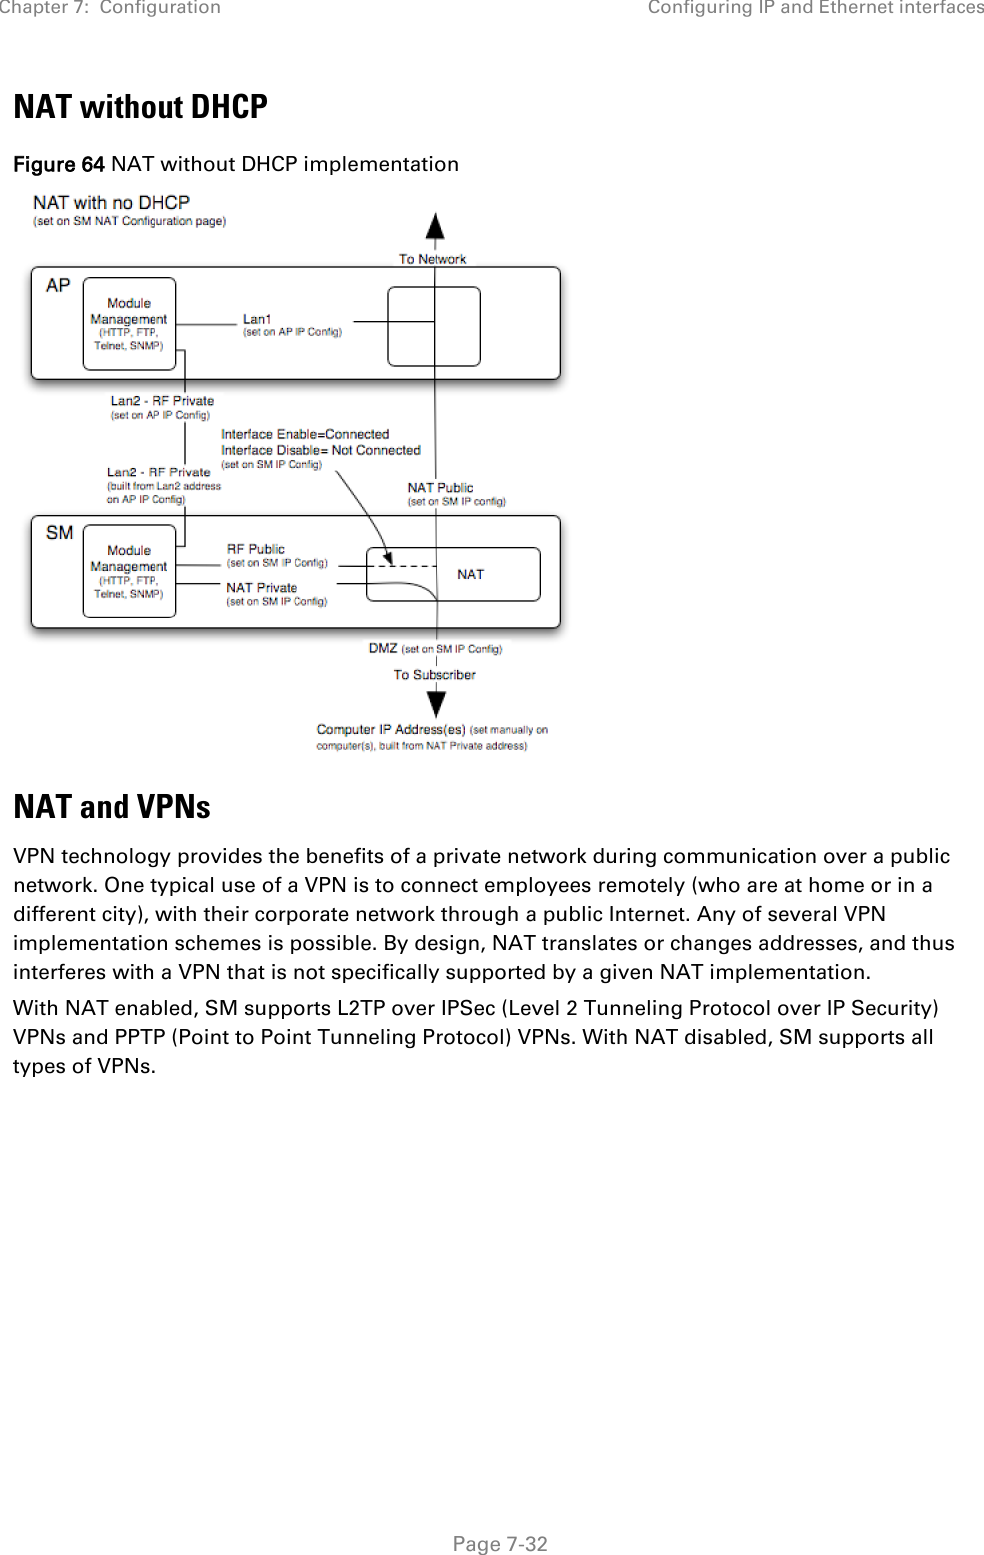 Chapter 7:  Configuration Configuring IP and Ethernet interfaces   Page 7-32 NAT without DHCP Figure 64 NAT without DHCP implementation  NAT and VPNs VPN technology provides the benefits of a private network during communication over a public network. One typical use of a VPN is to connect employees remotely (who are at home or in a different city), with their corporate network through a public Internet. Any of several VPN implementation schemes is possible. By design, NAT translates or changes addresses, and thus interferes with a VPN that is not specifically supported by a given NAT implementation. With NAT enabled, SM supports L2TP over IPSec (Level 2 Tunneling Protocol over IP Security) VPNs and PPTP (Point to Point Tunneling Protocol) VPNs. With NAT disabled, SM supports all types of VPNs.   